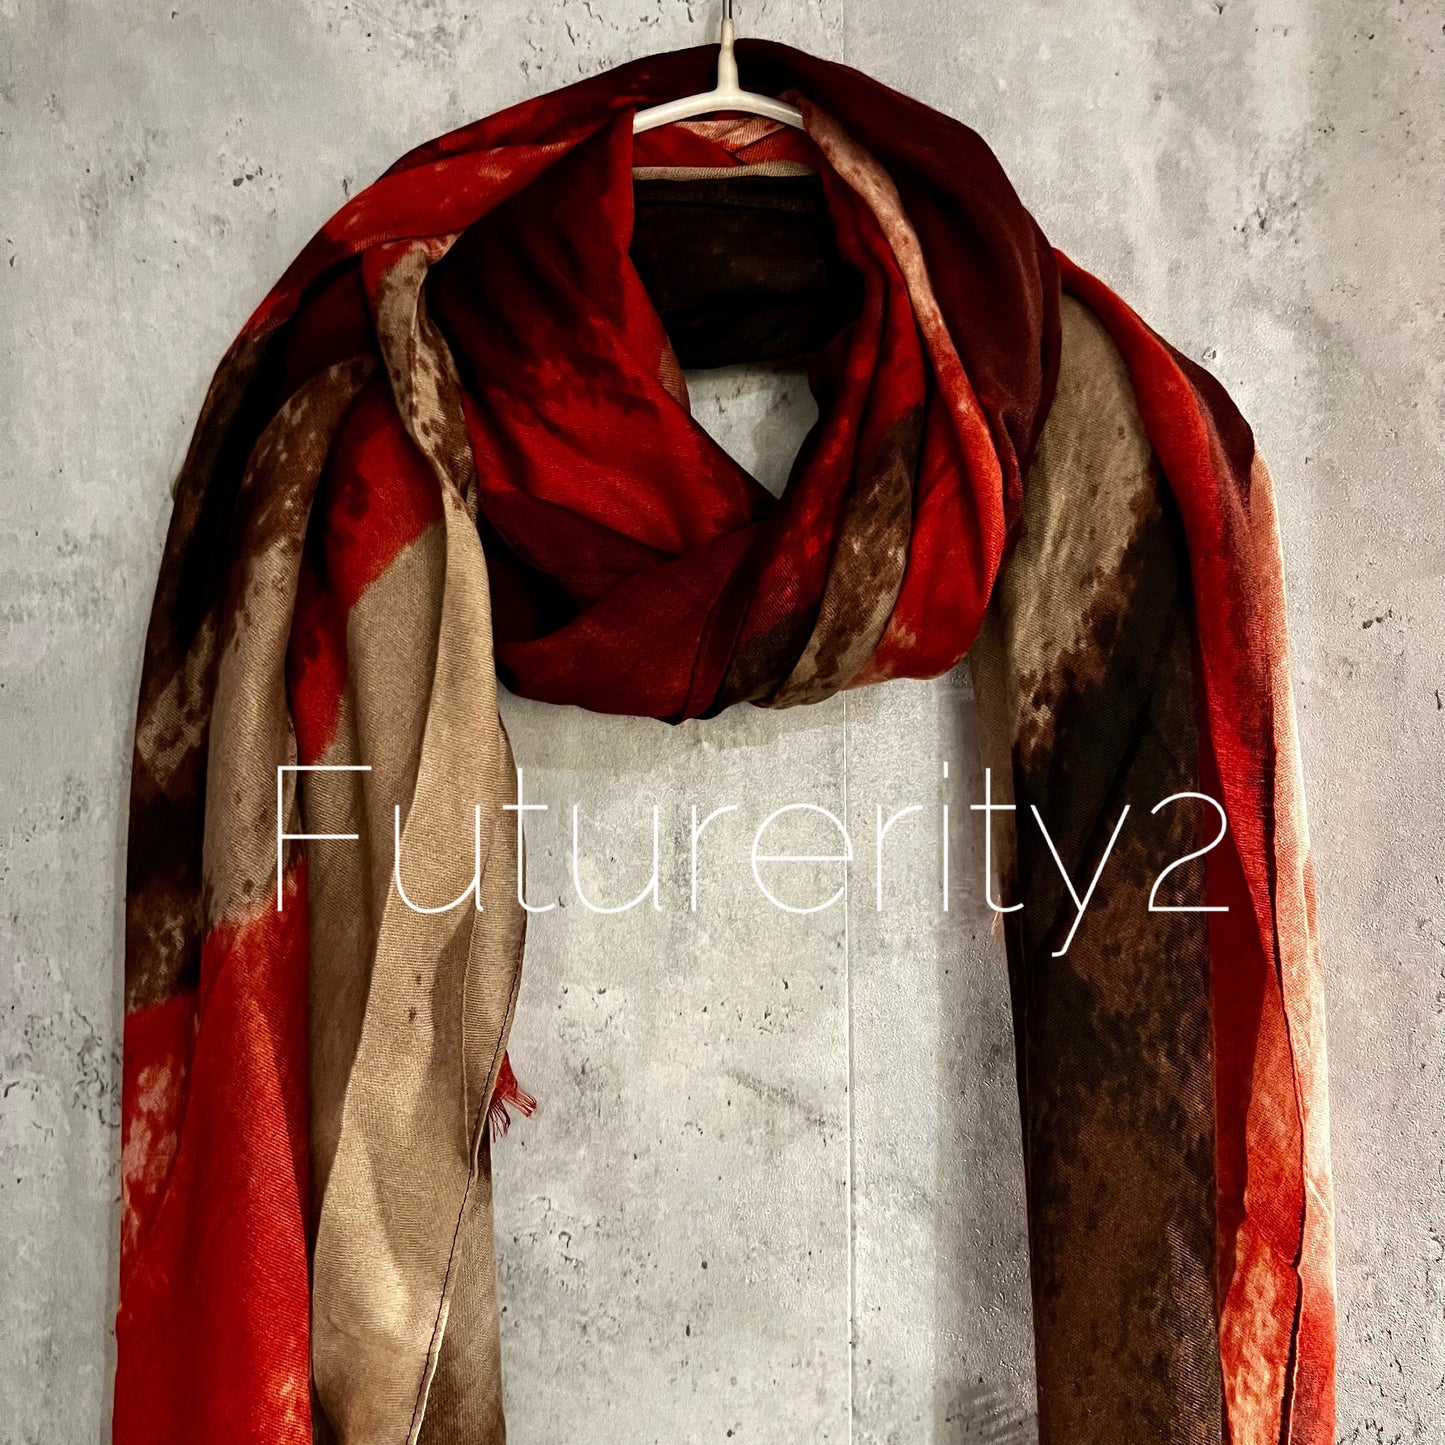 Brushstrokes Pattern Red Beige Cotton Scarf/Summer Autumn Winter Scarf/Gifts For Her Birthday Christmas/Scarf Women/UK Seller